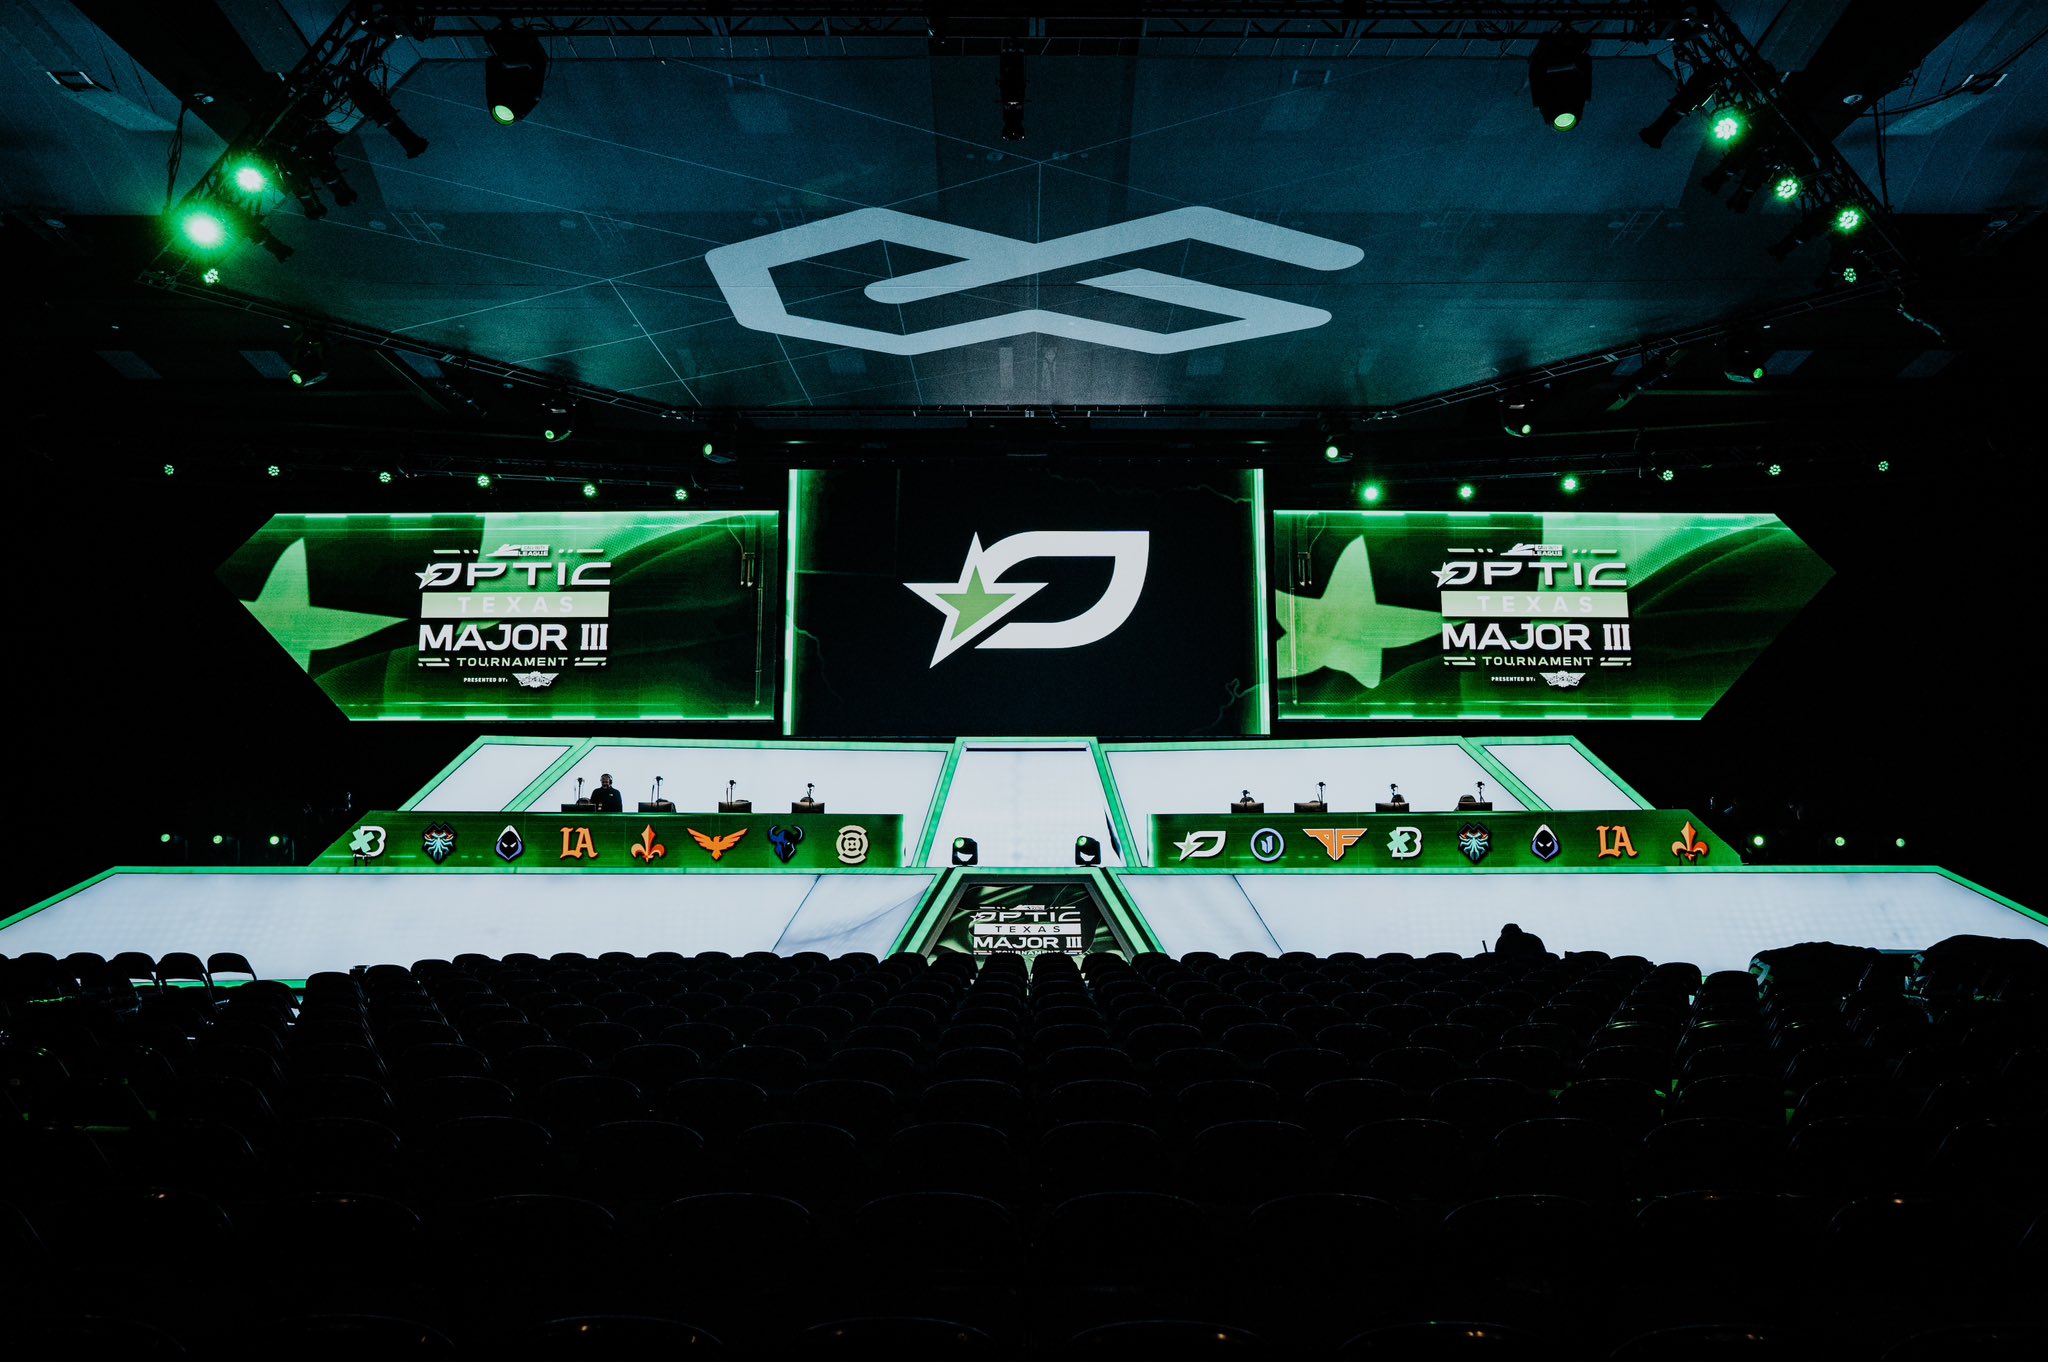 OpTic Texas CDL Roster 2023 - Signing Ghostyy For iLLeY